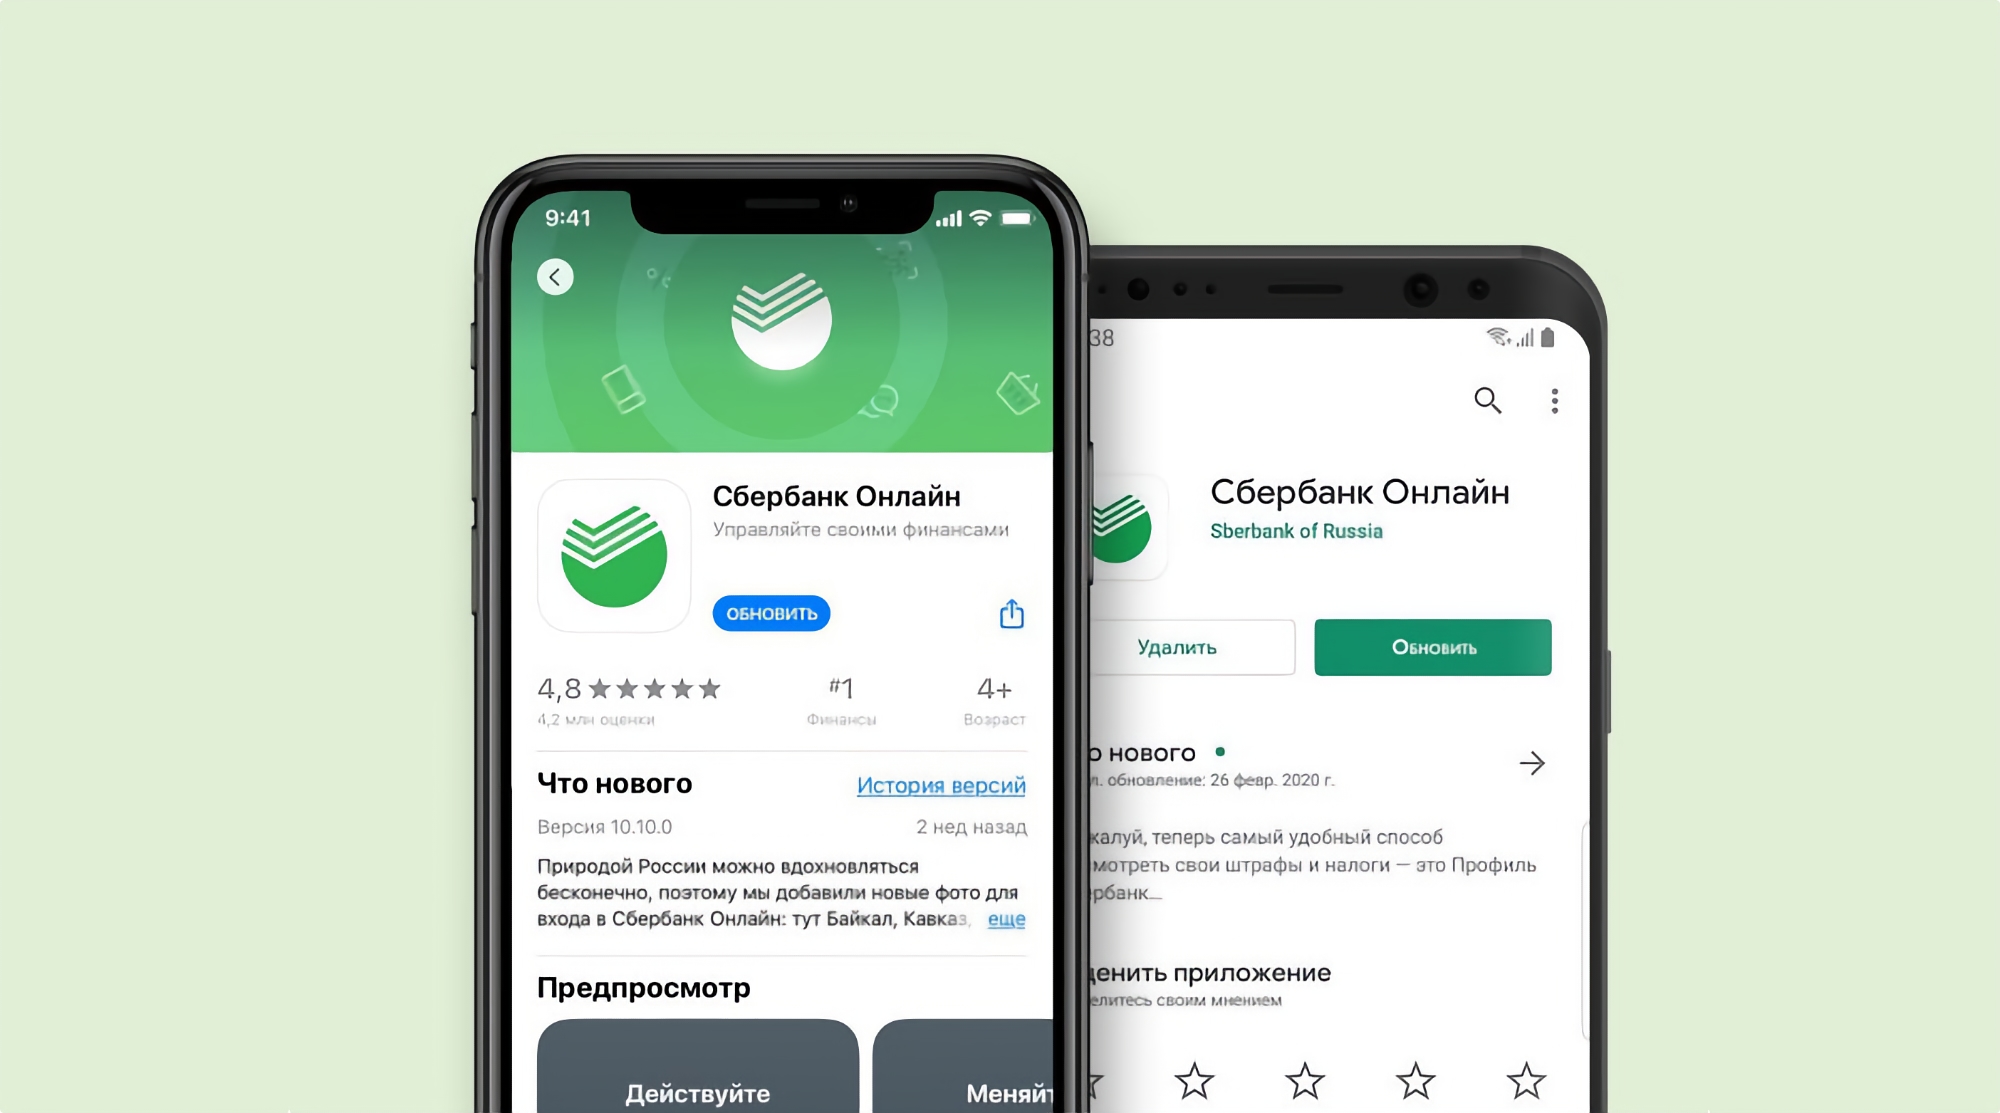 Sberbank is no longer available on Android and iOS